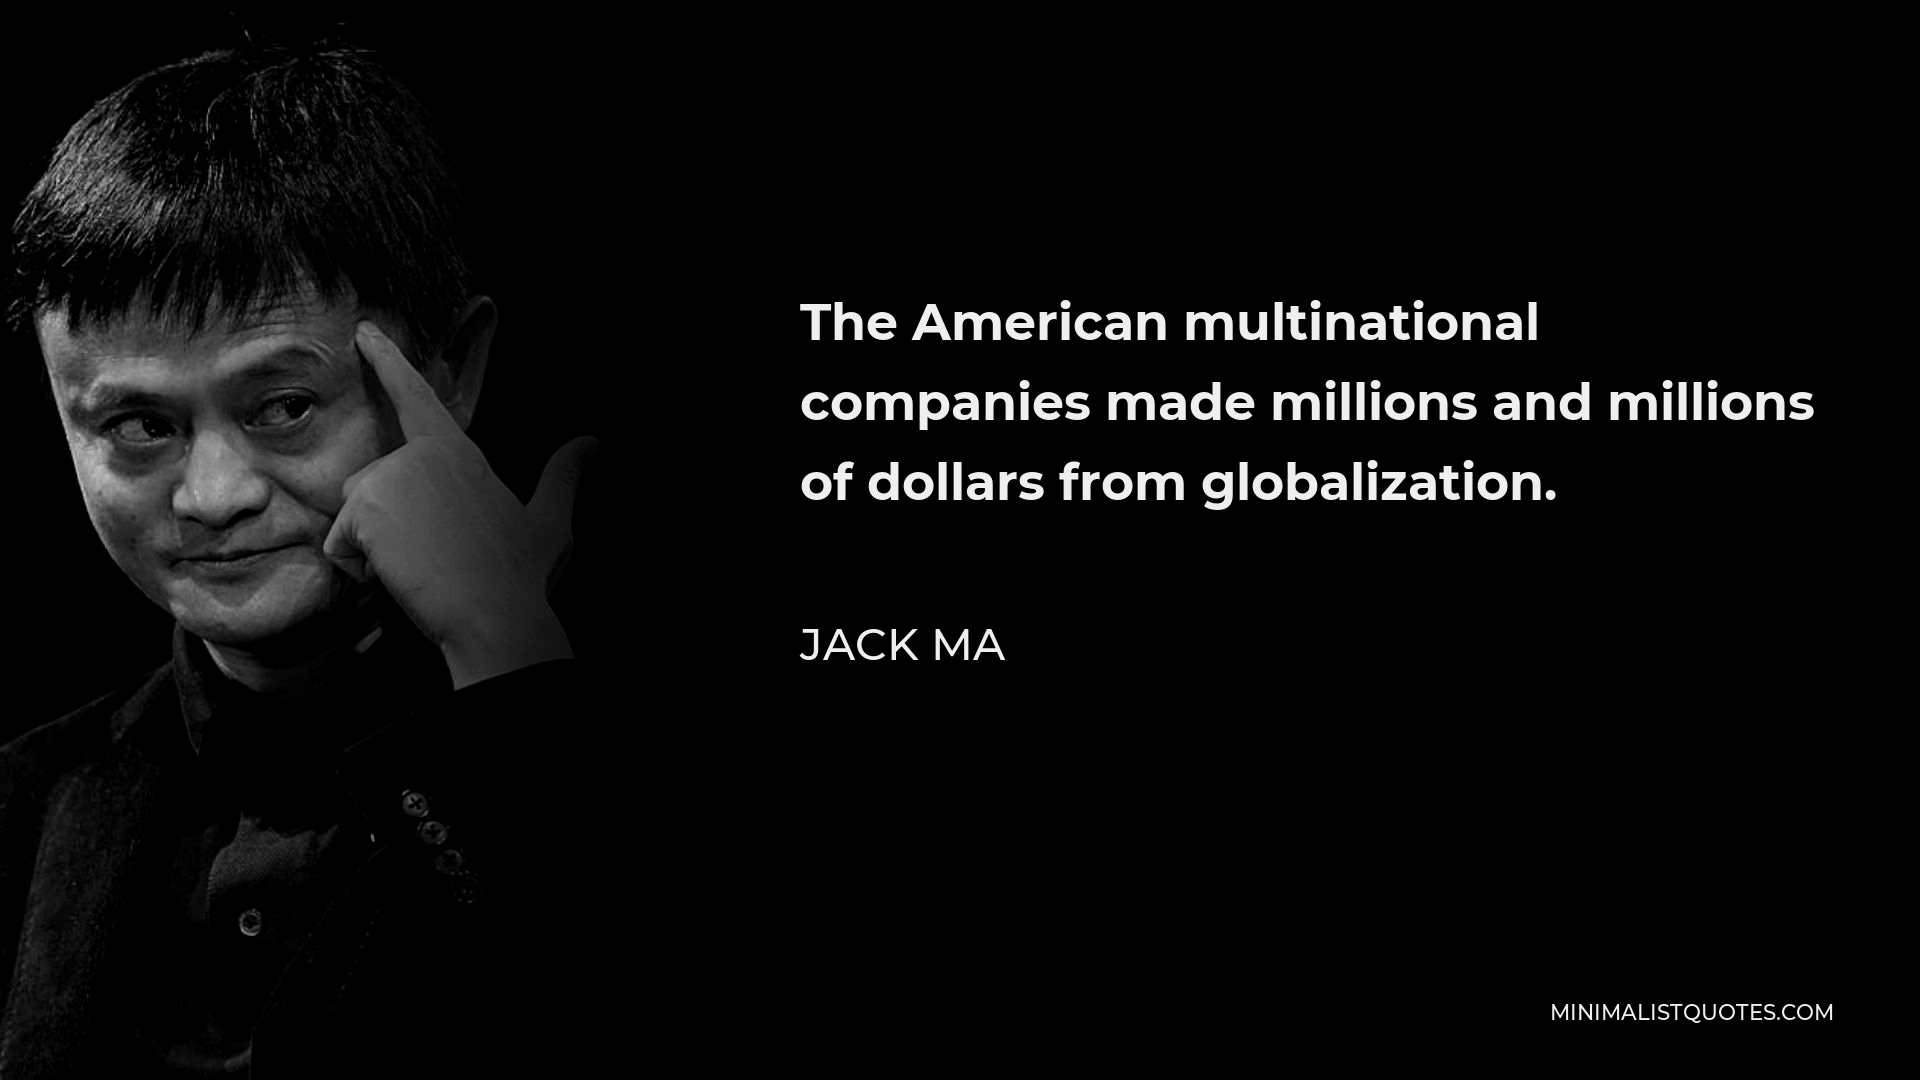 Jack Ma Quote - The American multinational companies made millions and millions of dollars from globalization.